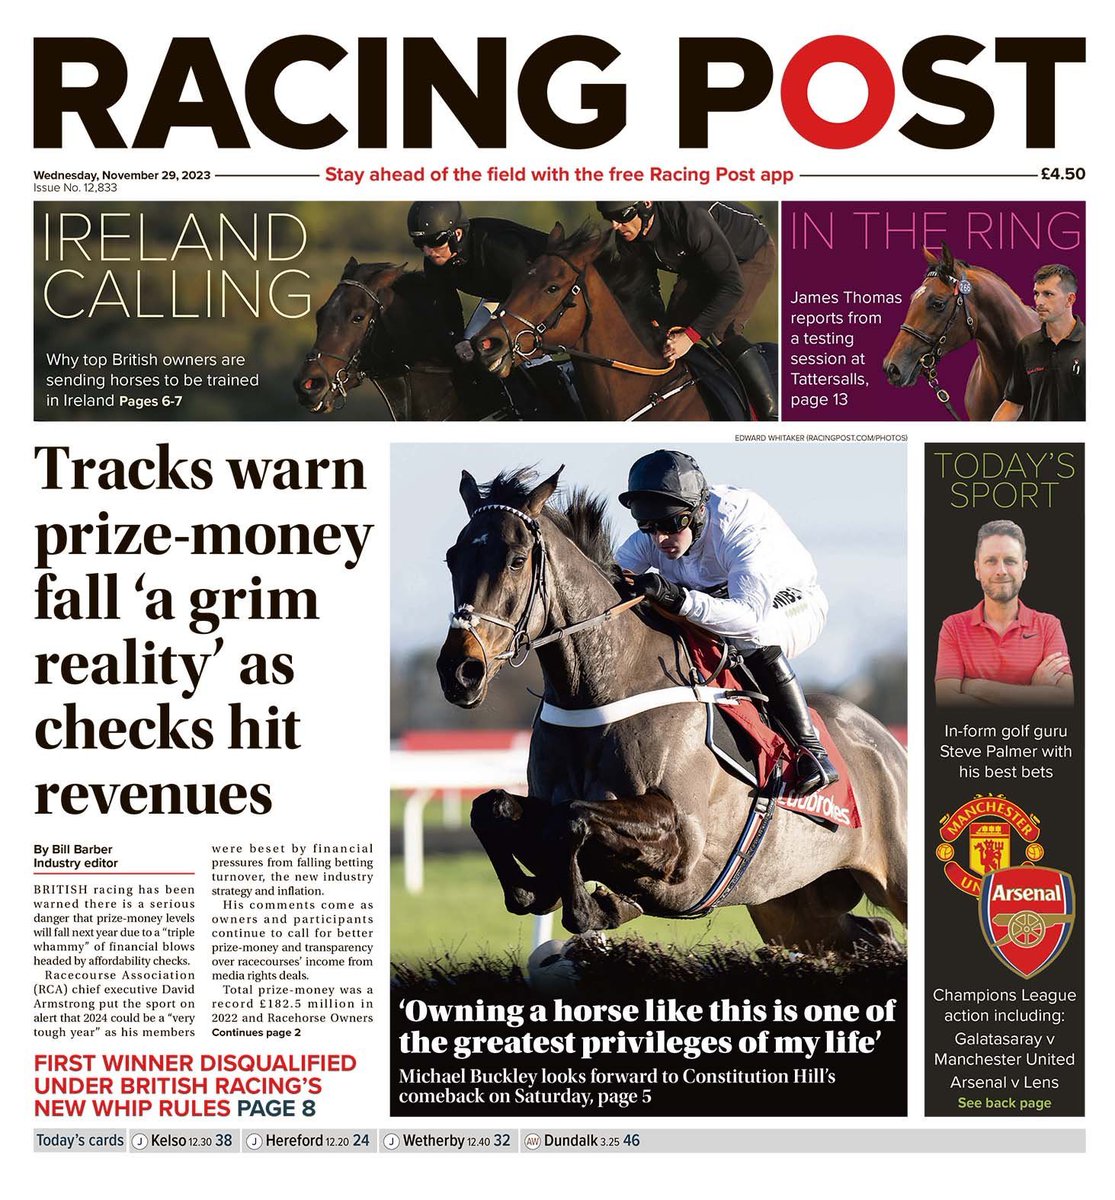 This is a clear indication of how affordability checks will be blamed for all of racing’s ills. Not the switching to turnover based model, diluting of the racing product, backing of FOBTs, turning a blind eye to restrictions, failing to reinvest media rights in prize money etc.